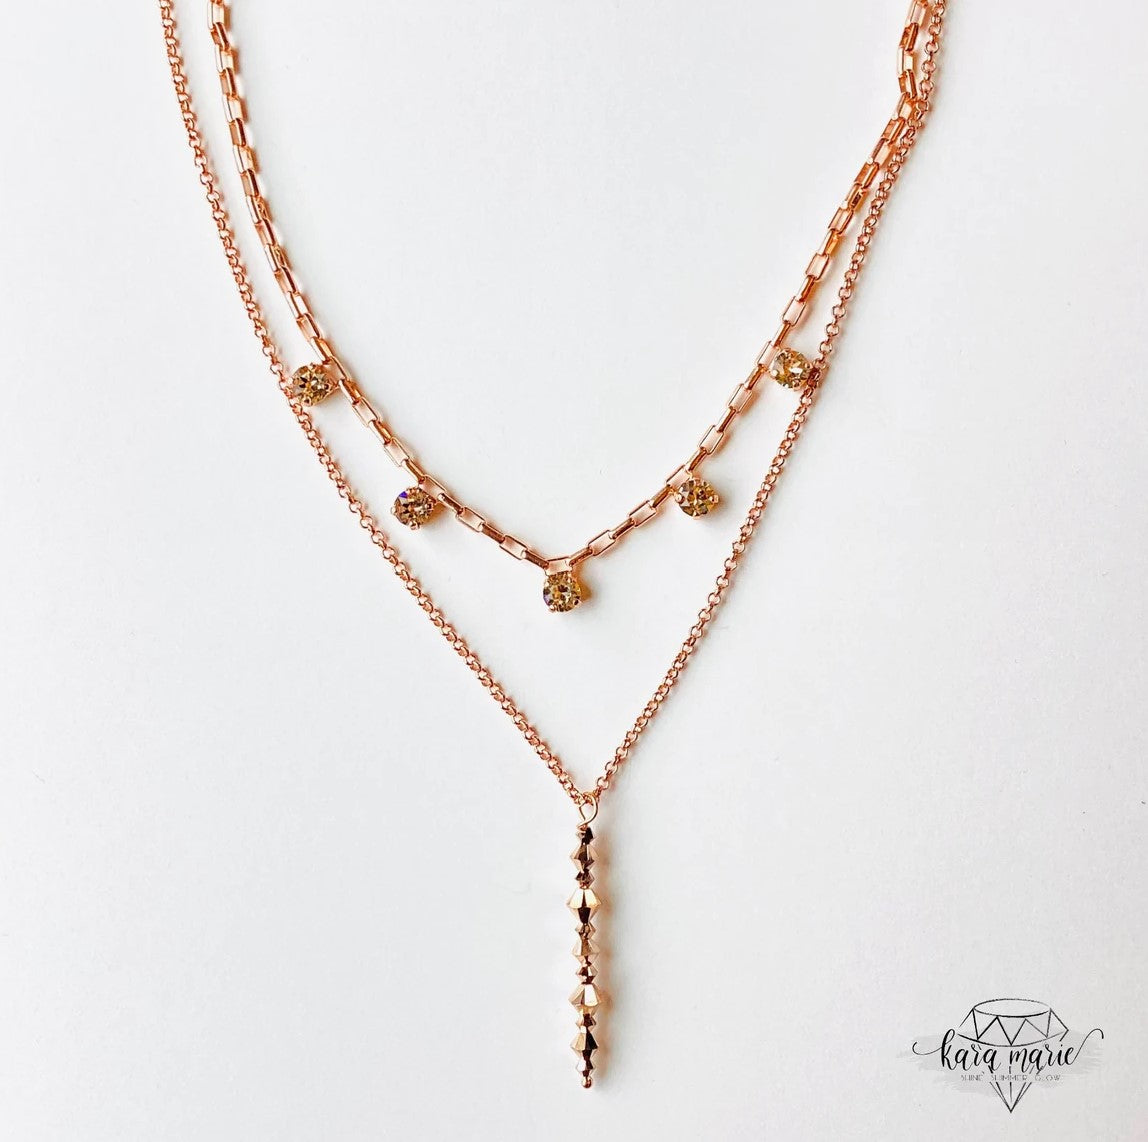 Kara Marie Jewelry - Onyx Angels Collection - Rose Gold Elegance Double Necklace in Rose Gold x Light Silk